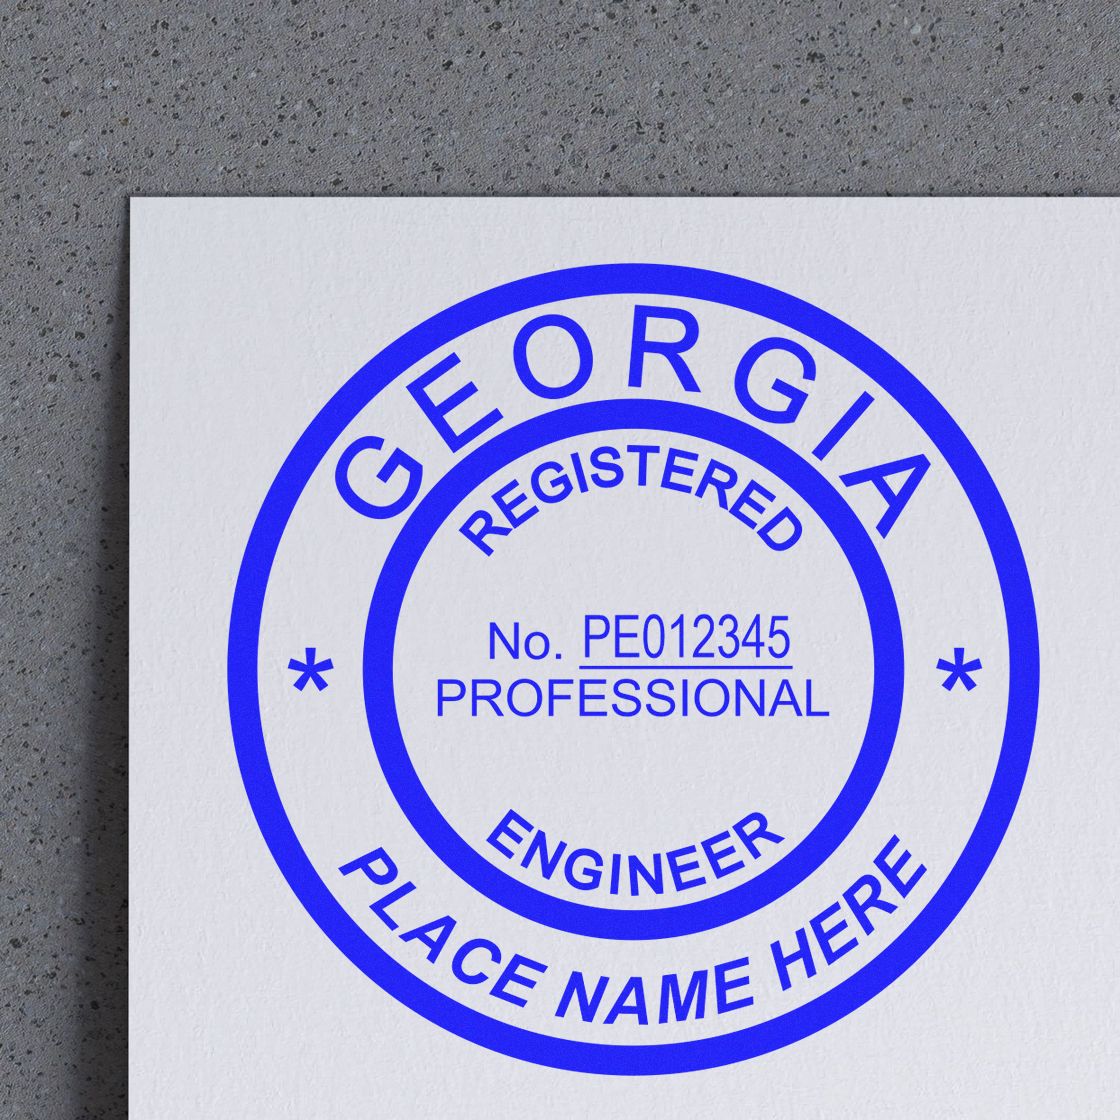 The Digital Georgia PE Stamp and Electronic Seal for Georgia Engineer stamp impression comes to life with a crisp, detailed photo on paper - showcasing true professional quality.